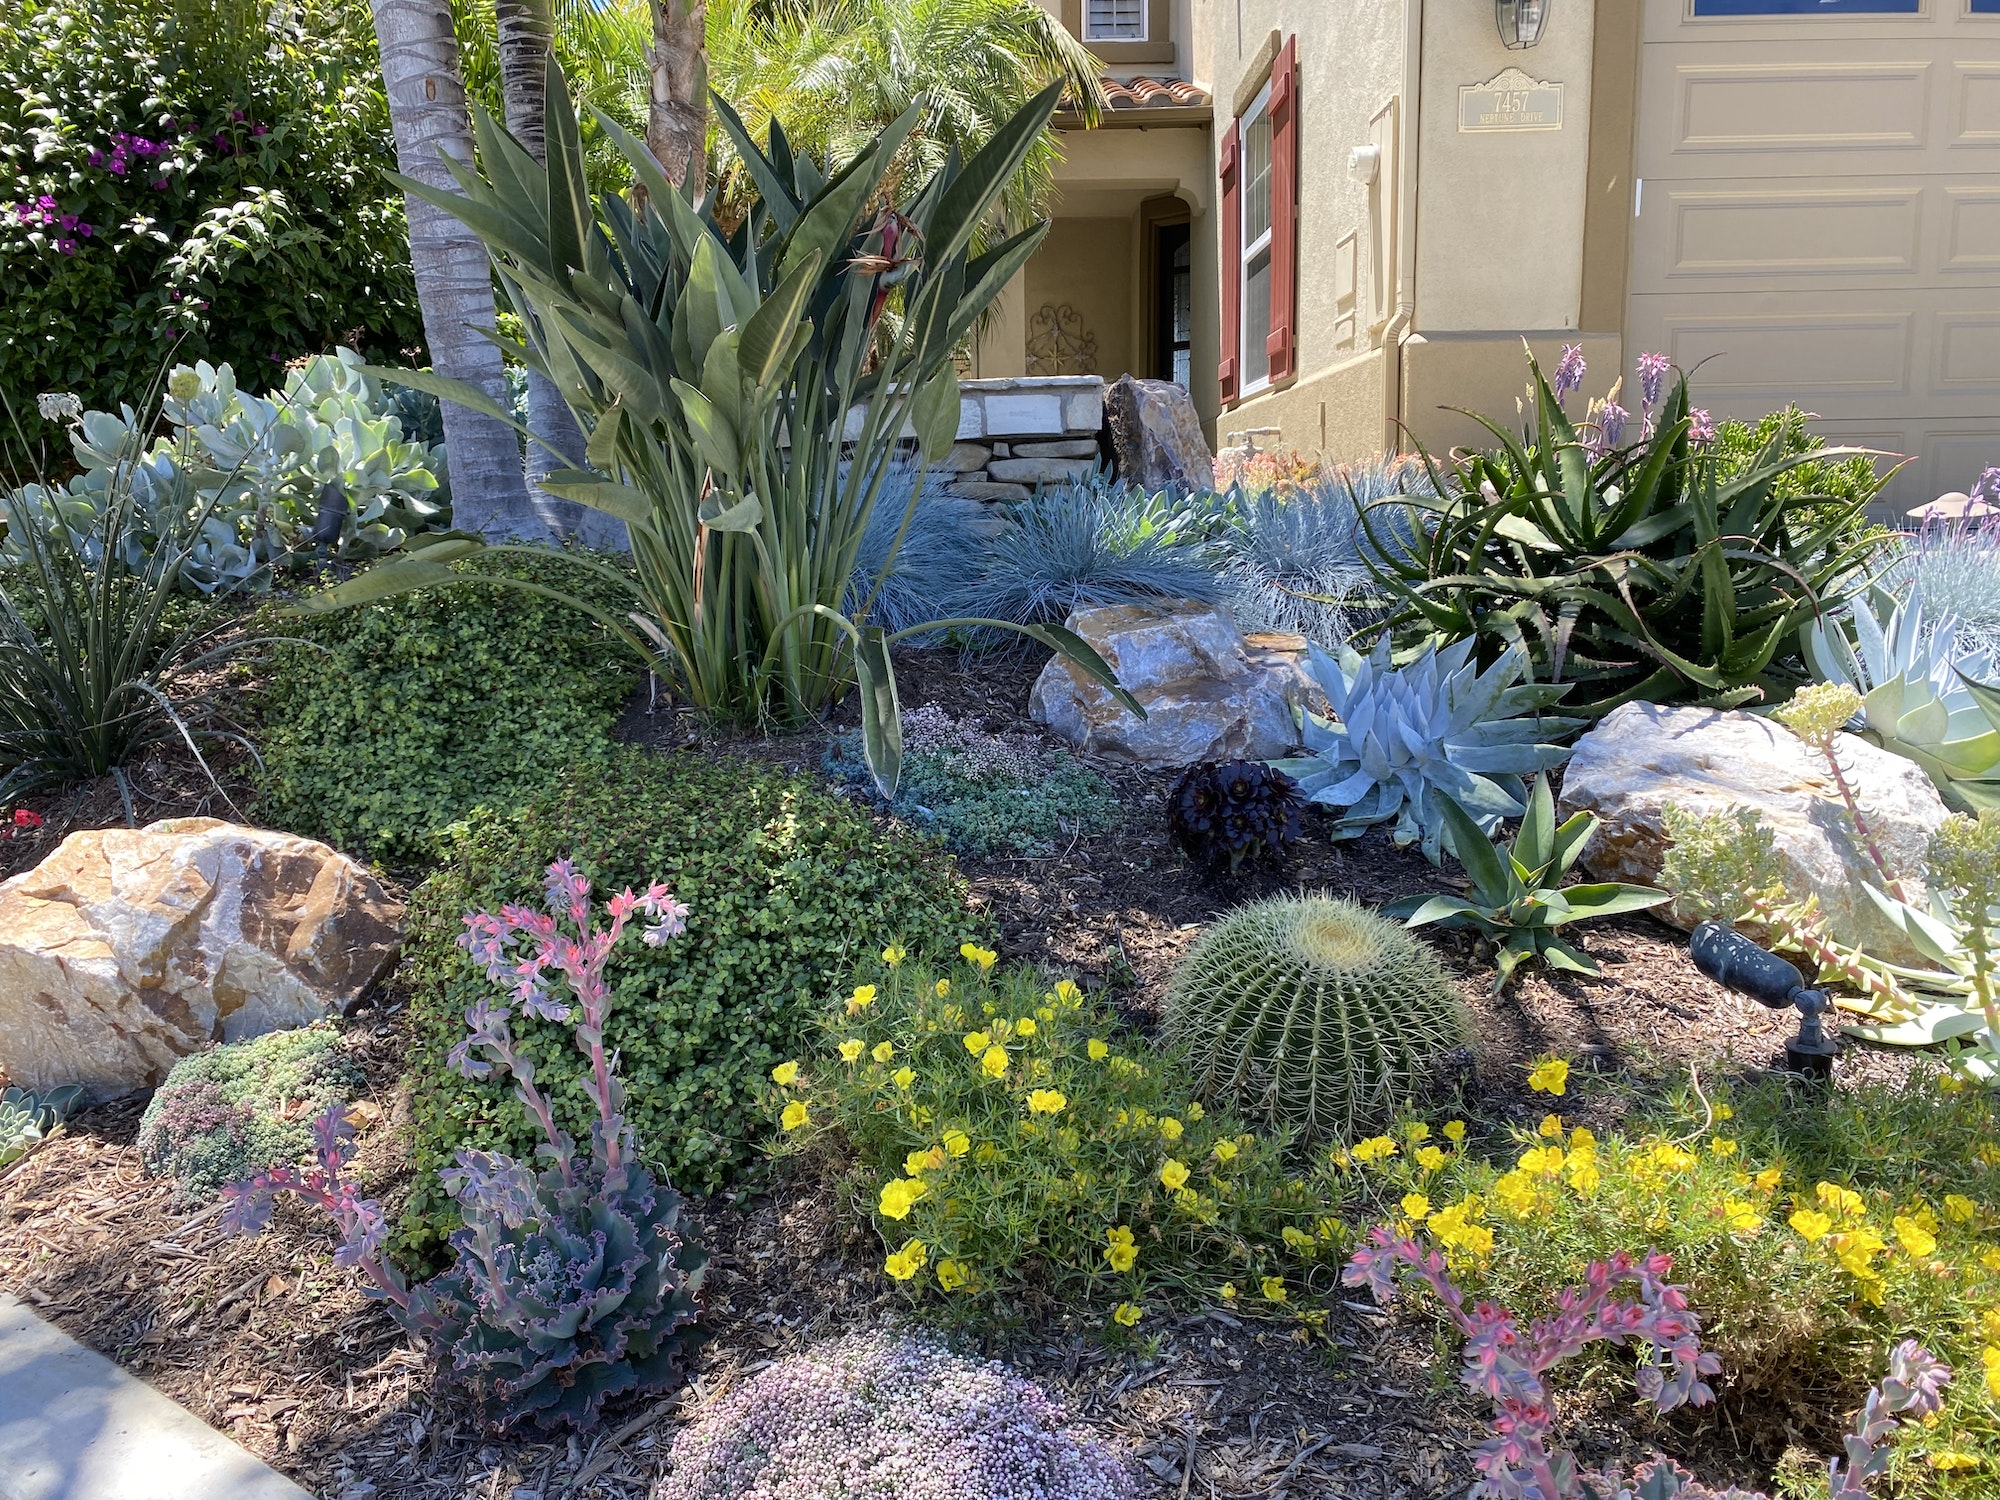 drought tolerant garden succulents , rocks and cactus uses very little water , is low maintenance